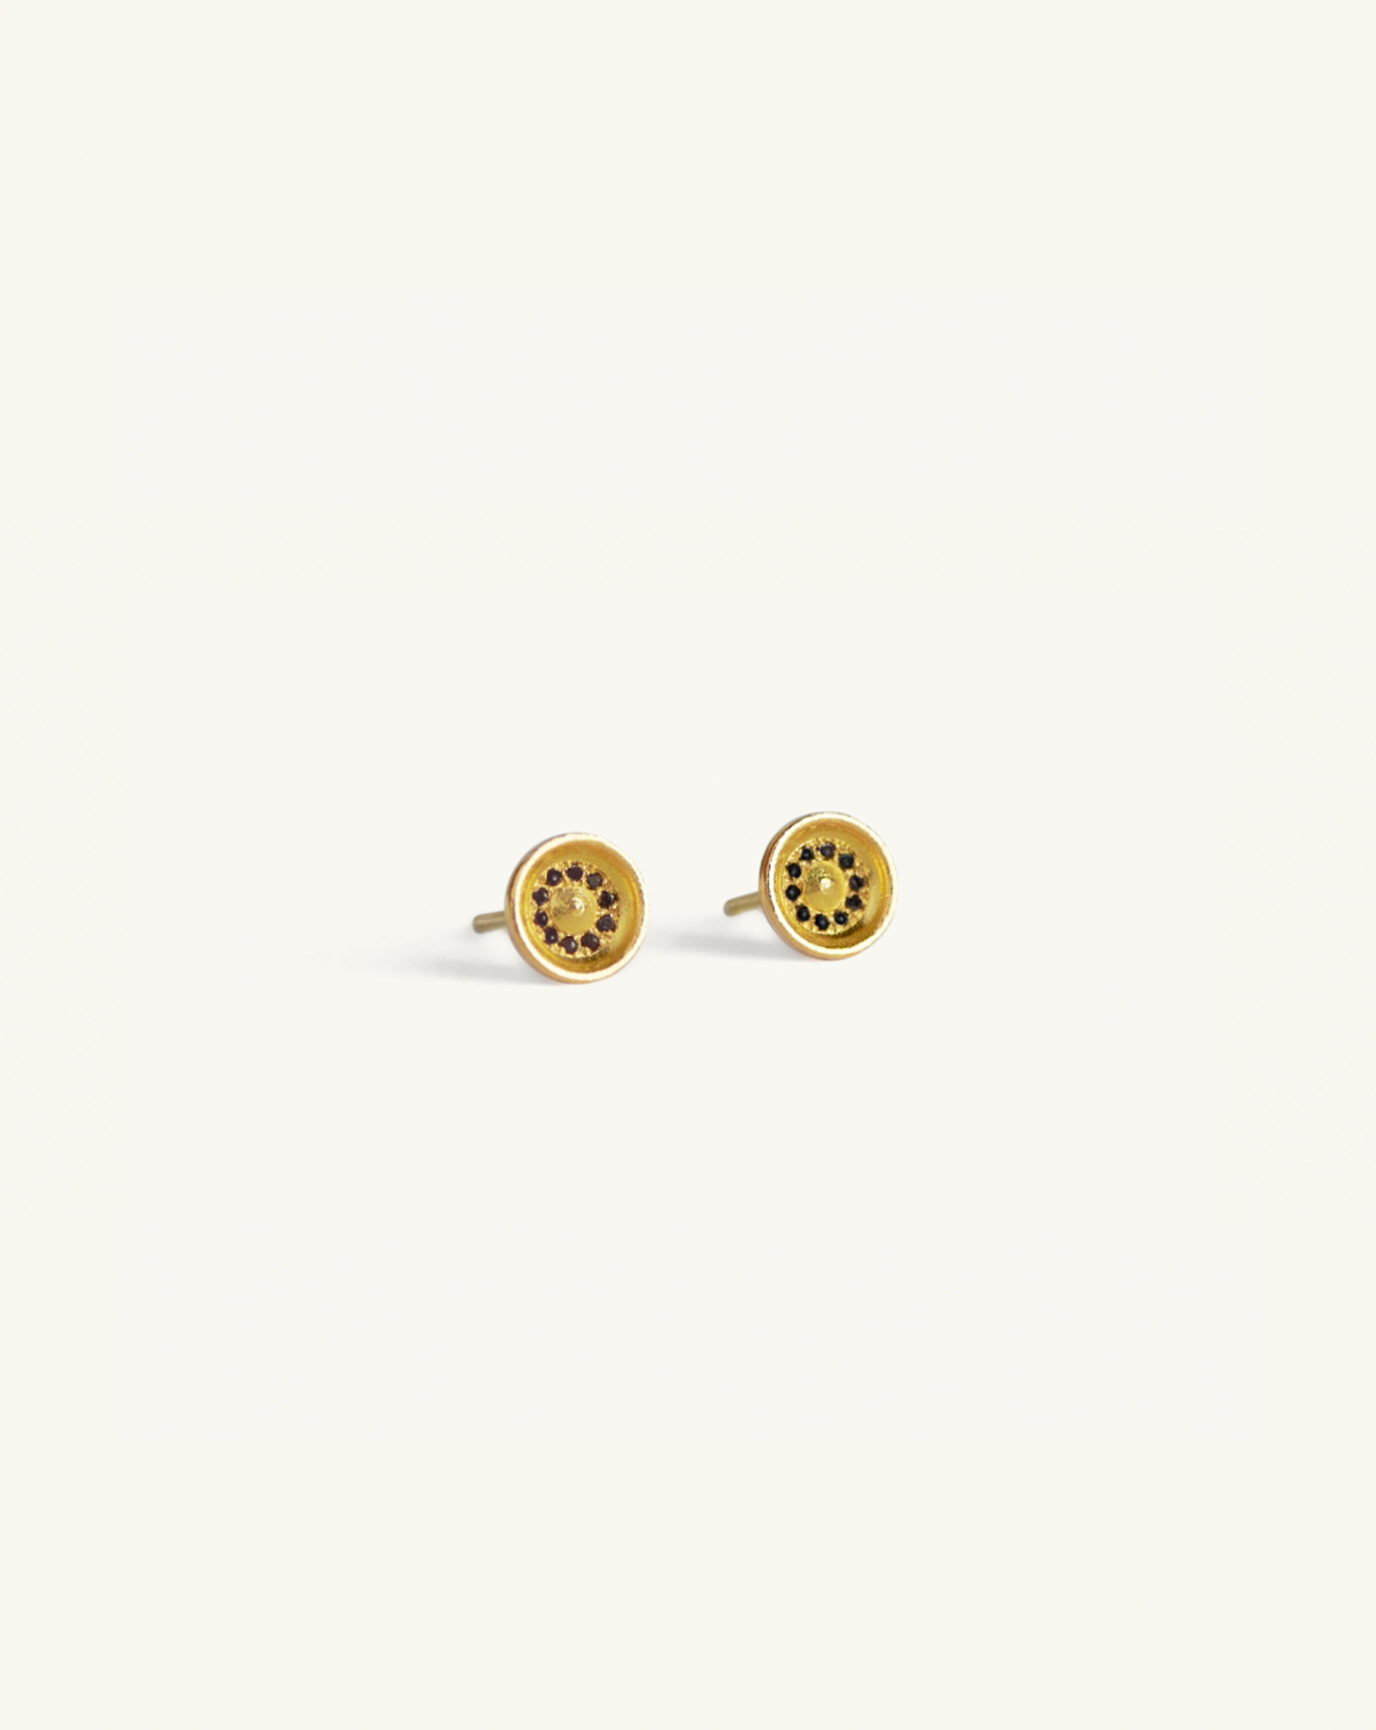 Product image of the large concave gold studs with black diamond pavé